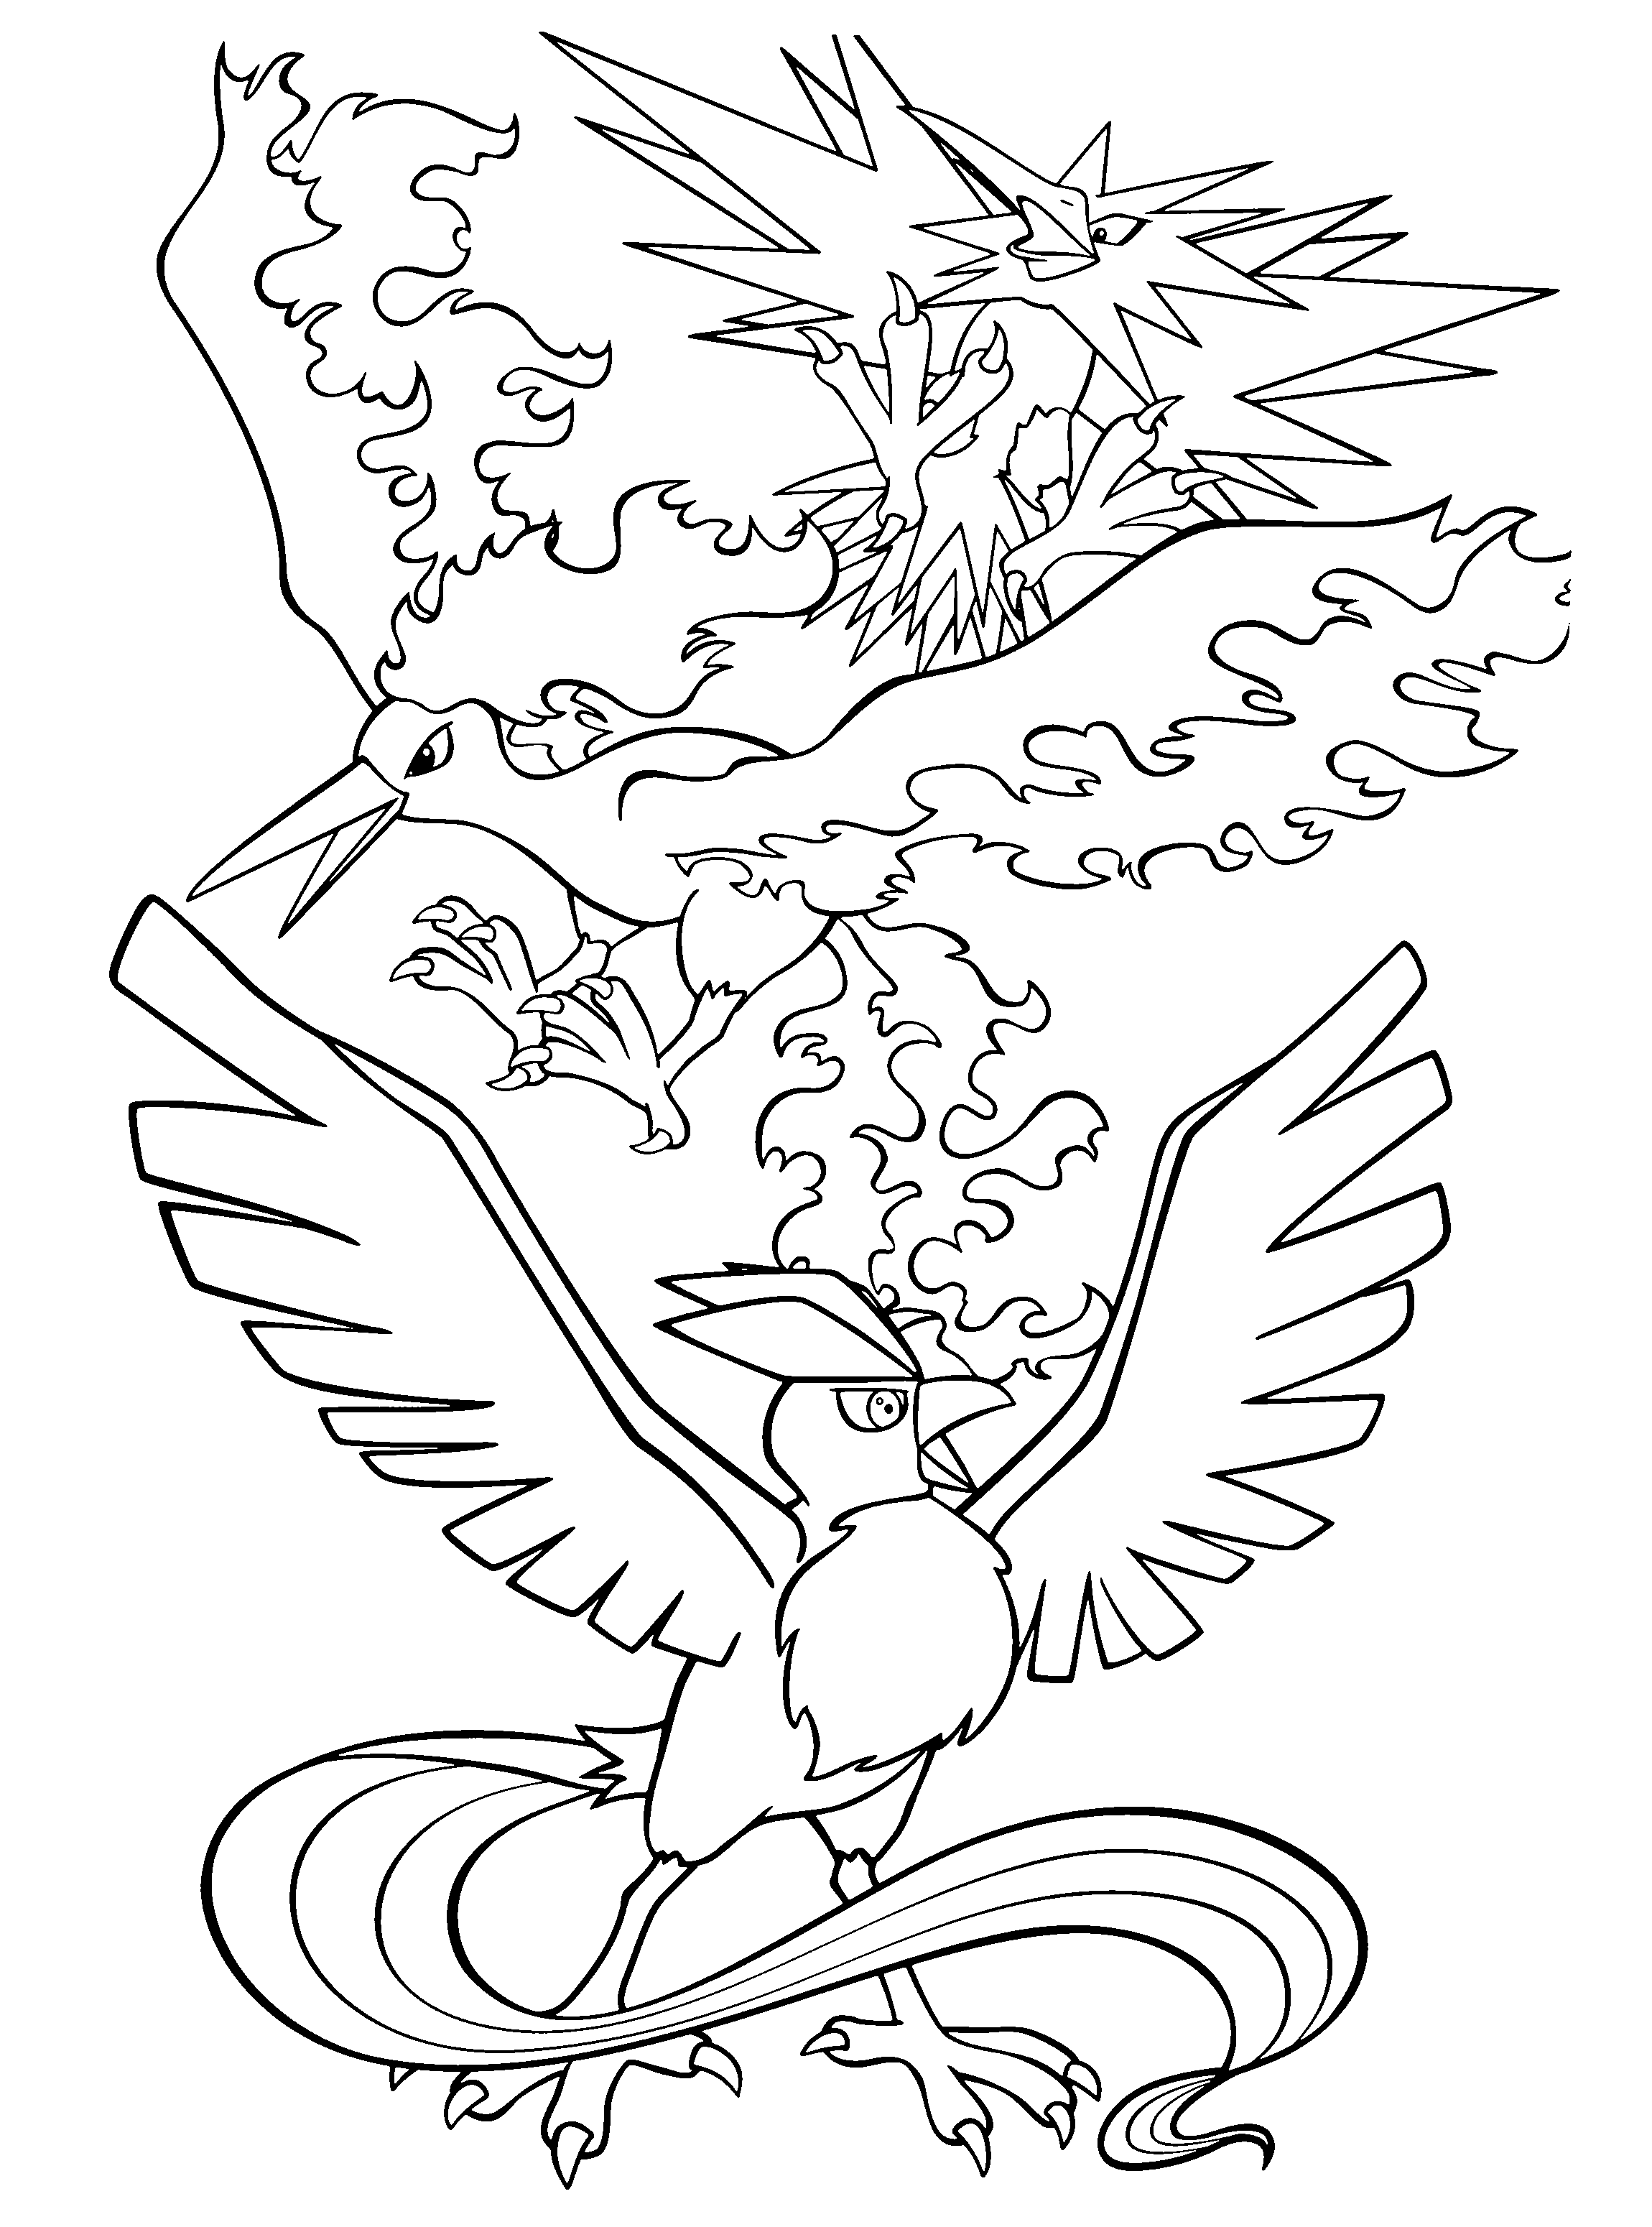 Printable Legendary Pokemon Coloring Pages - Printable Legendary Pokemon Coloring Pages